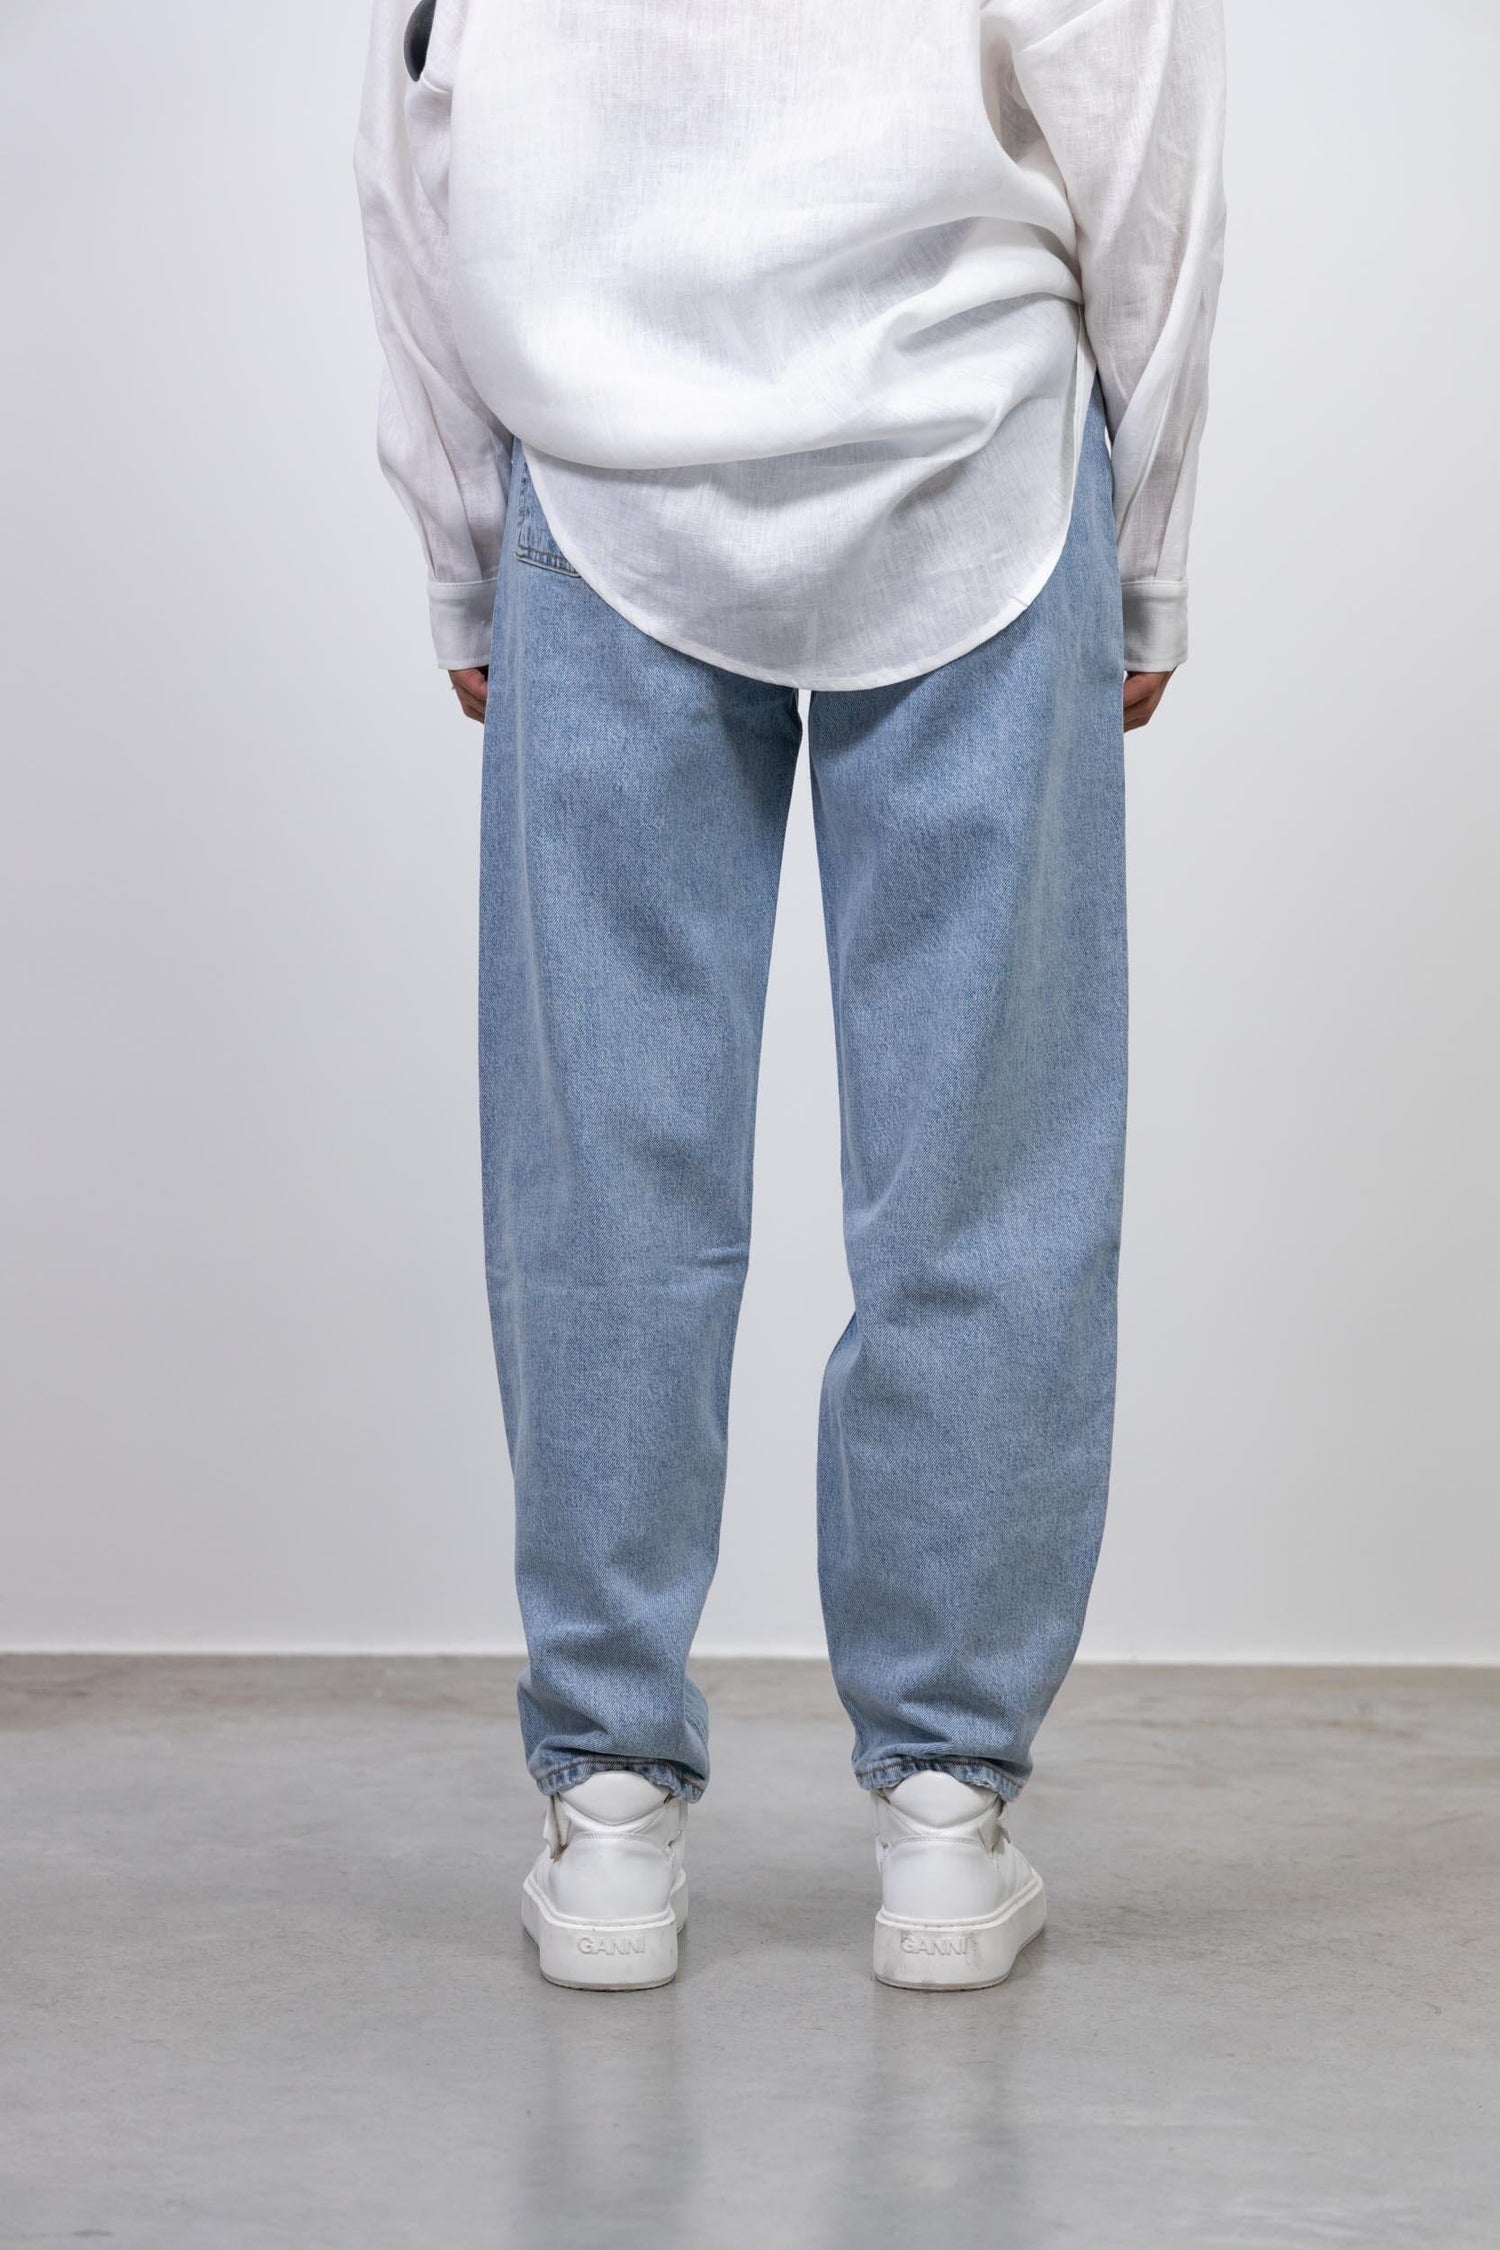 HIGH RISE TAPERED BAGGY JEANS IN DIMENSION JEANS AGOLDE 